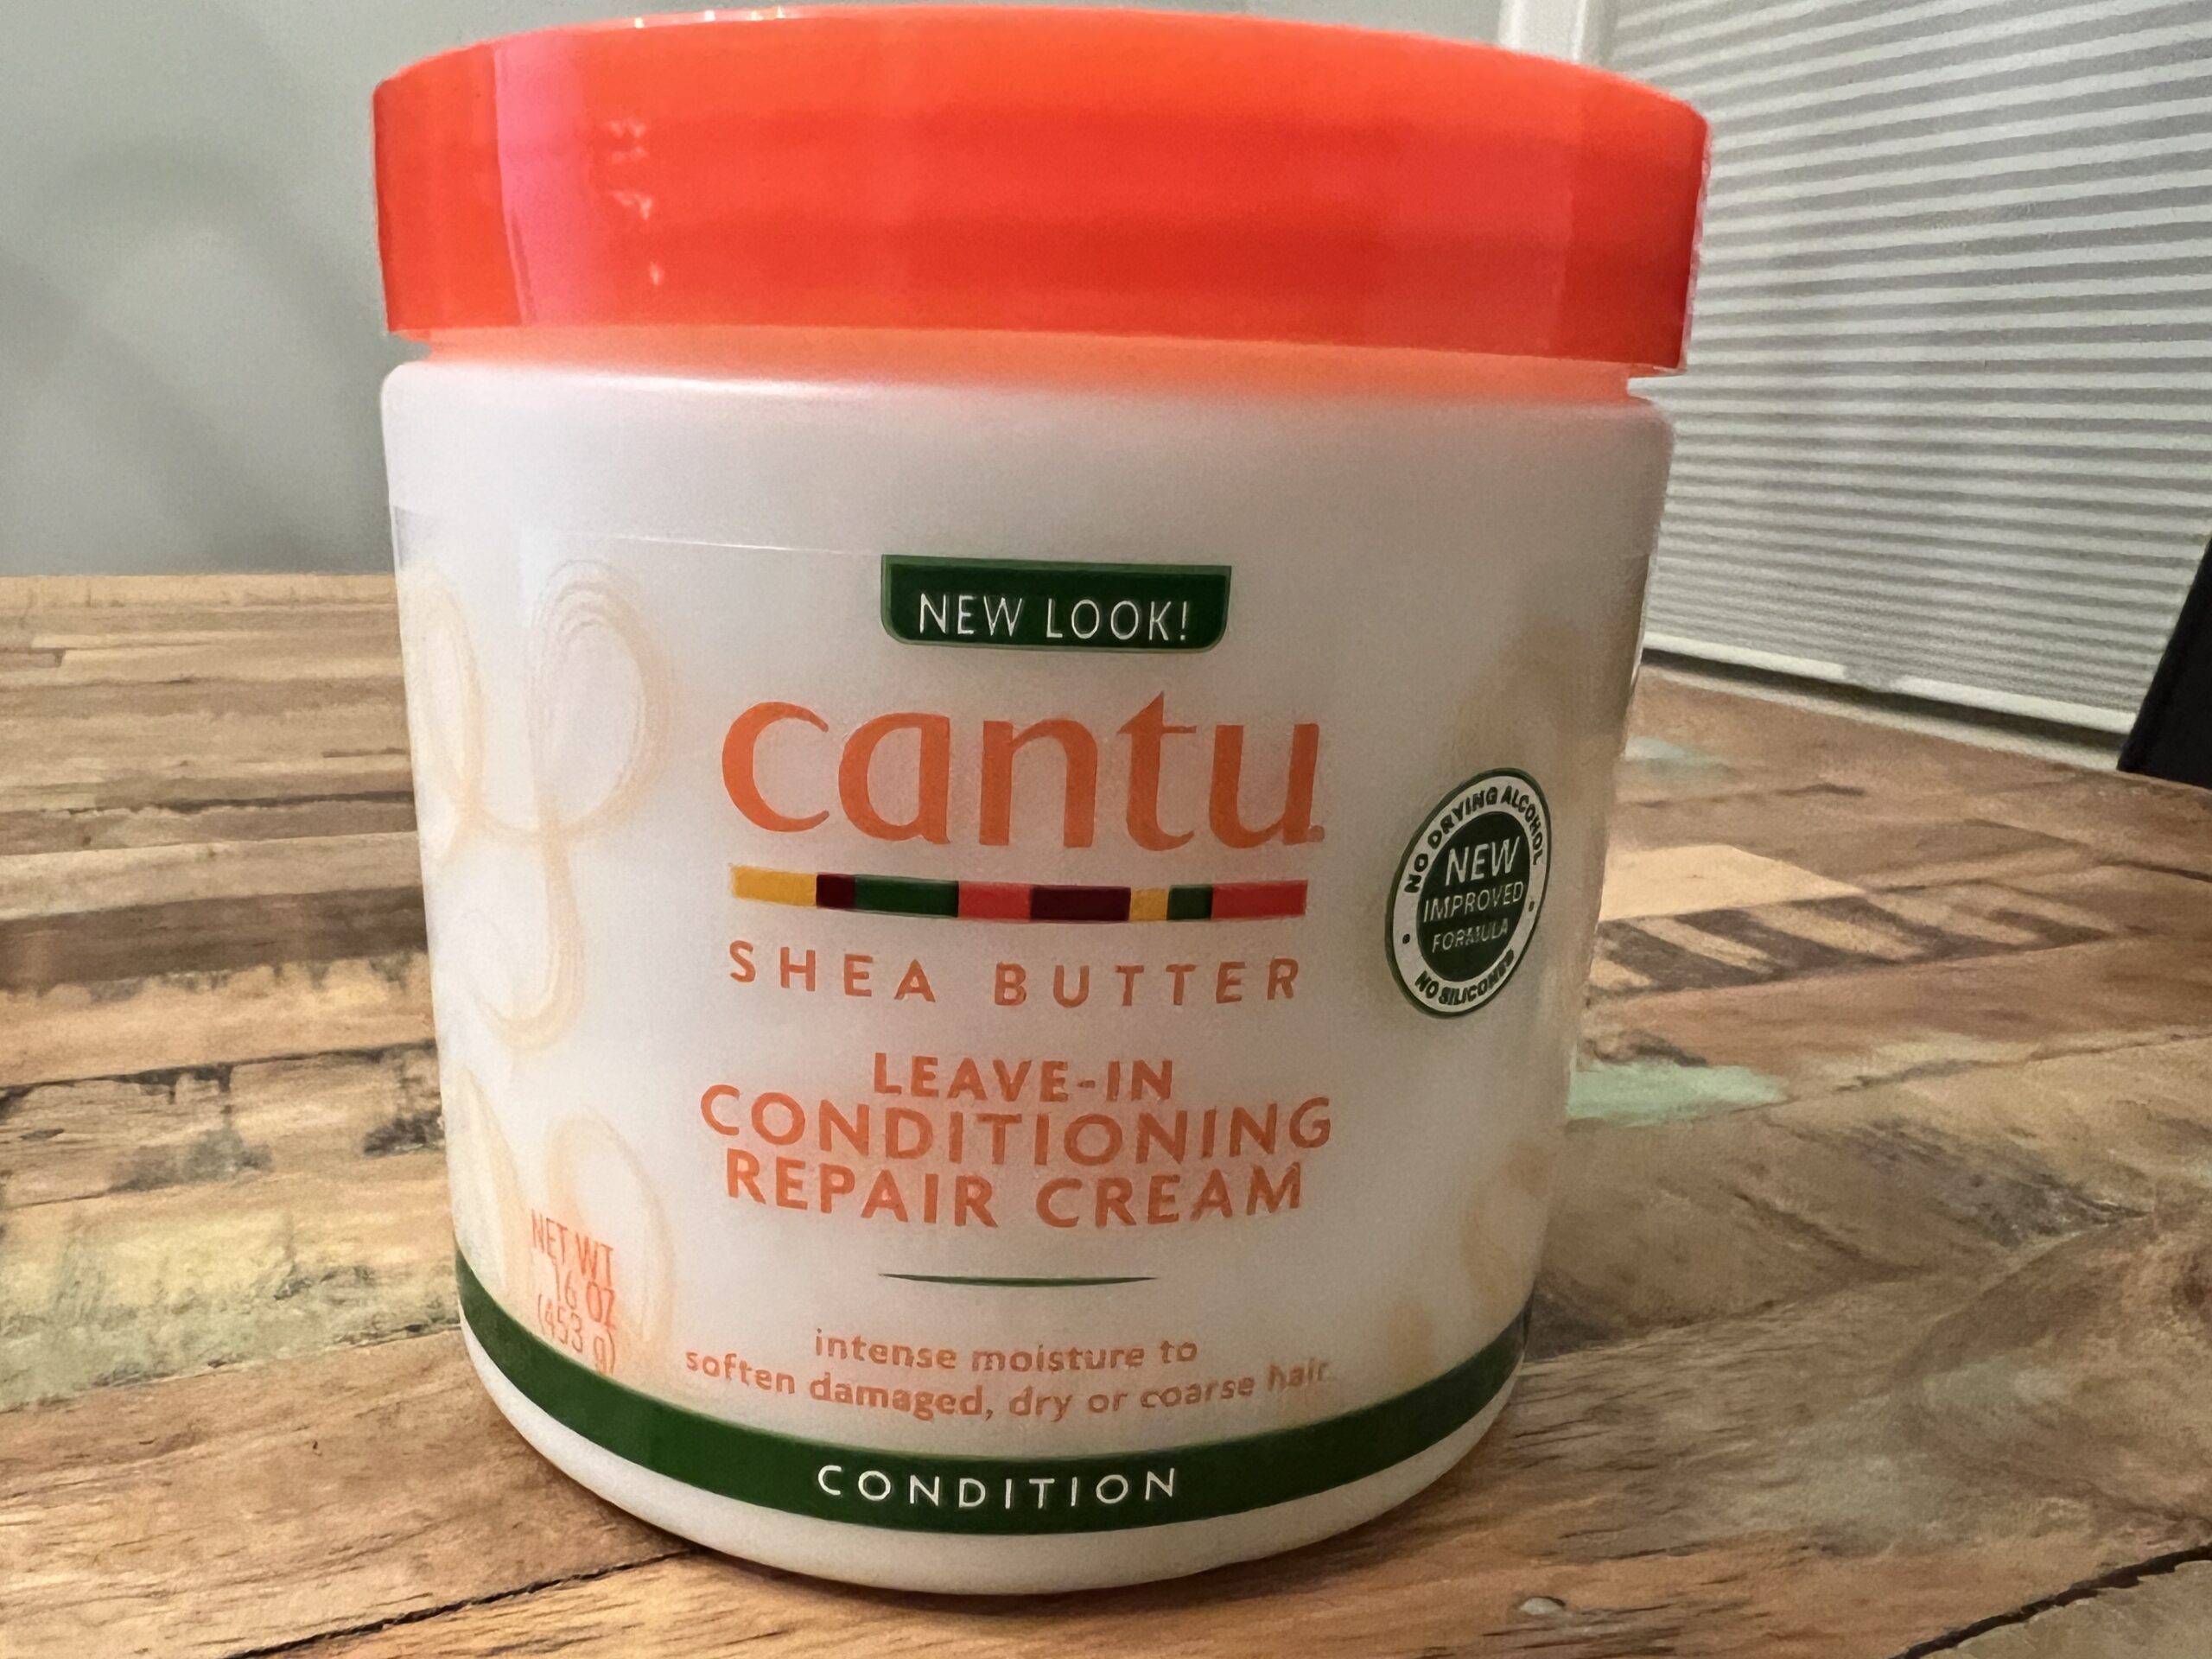 Bottle of Cantu Shea Butter Leave-In Conditioning Repair Cream, targeted for softening and repairing dry, damaged hair.